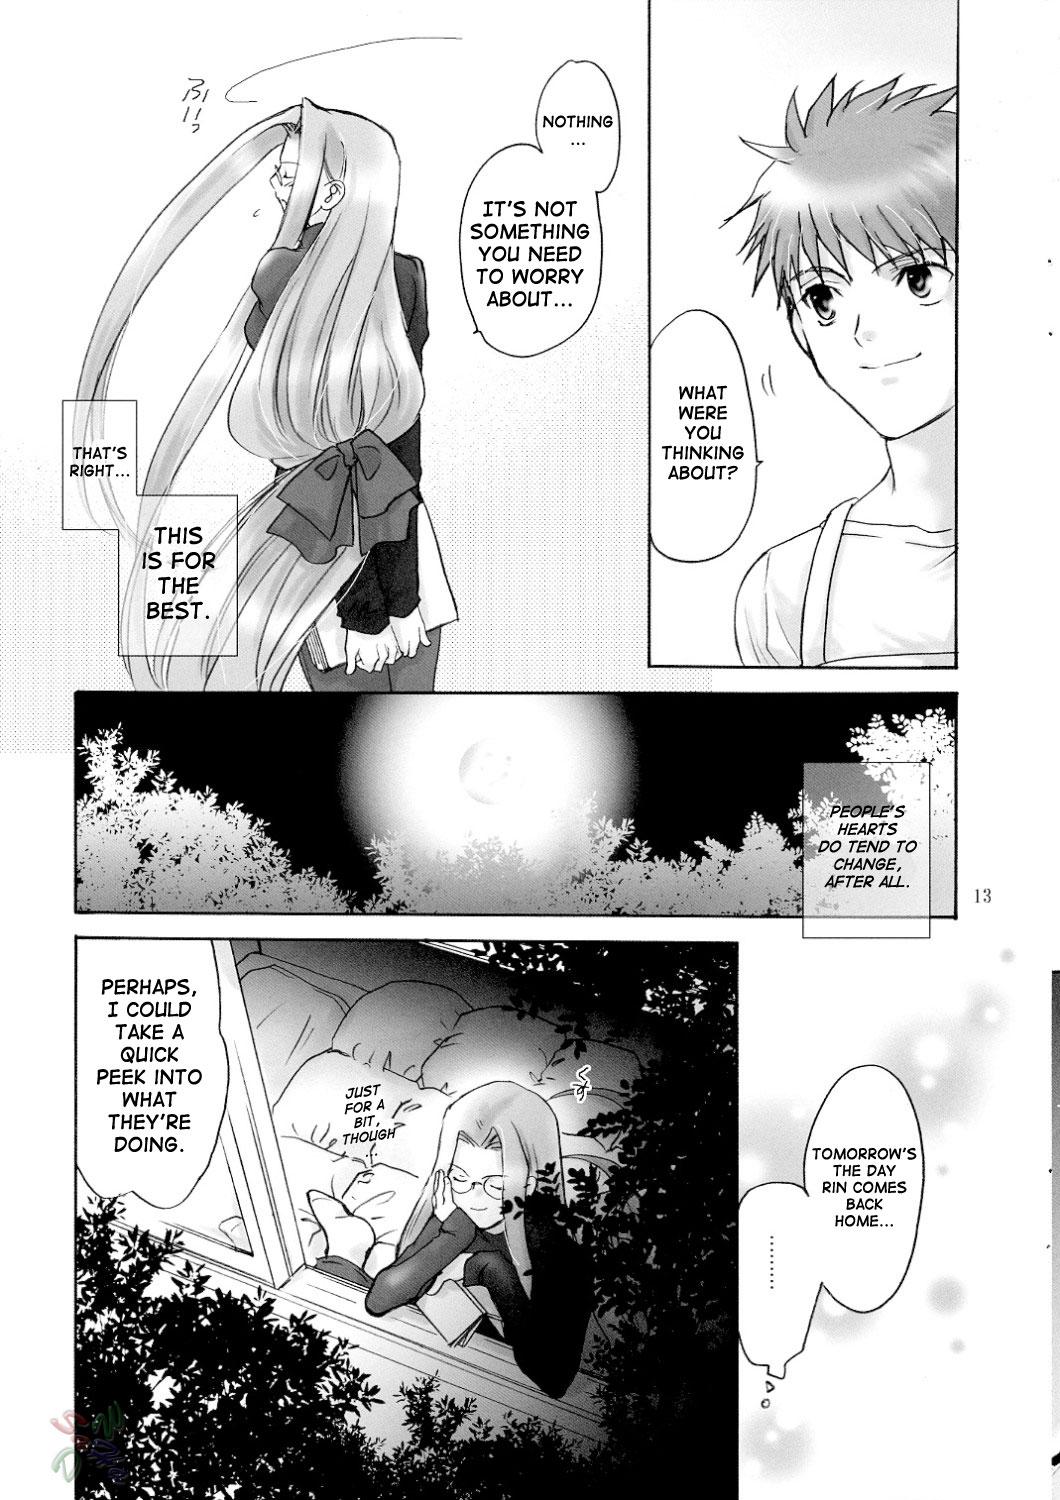 Role Play Velvet Rose - Fate stay night Full - Page 12